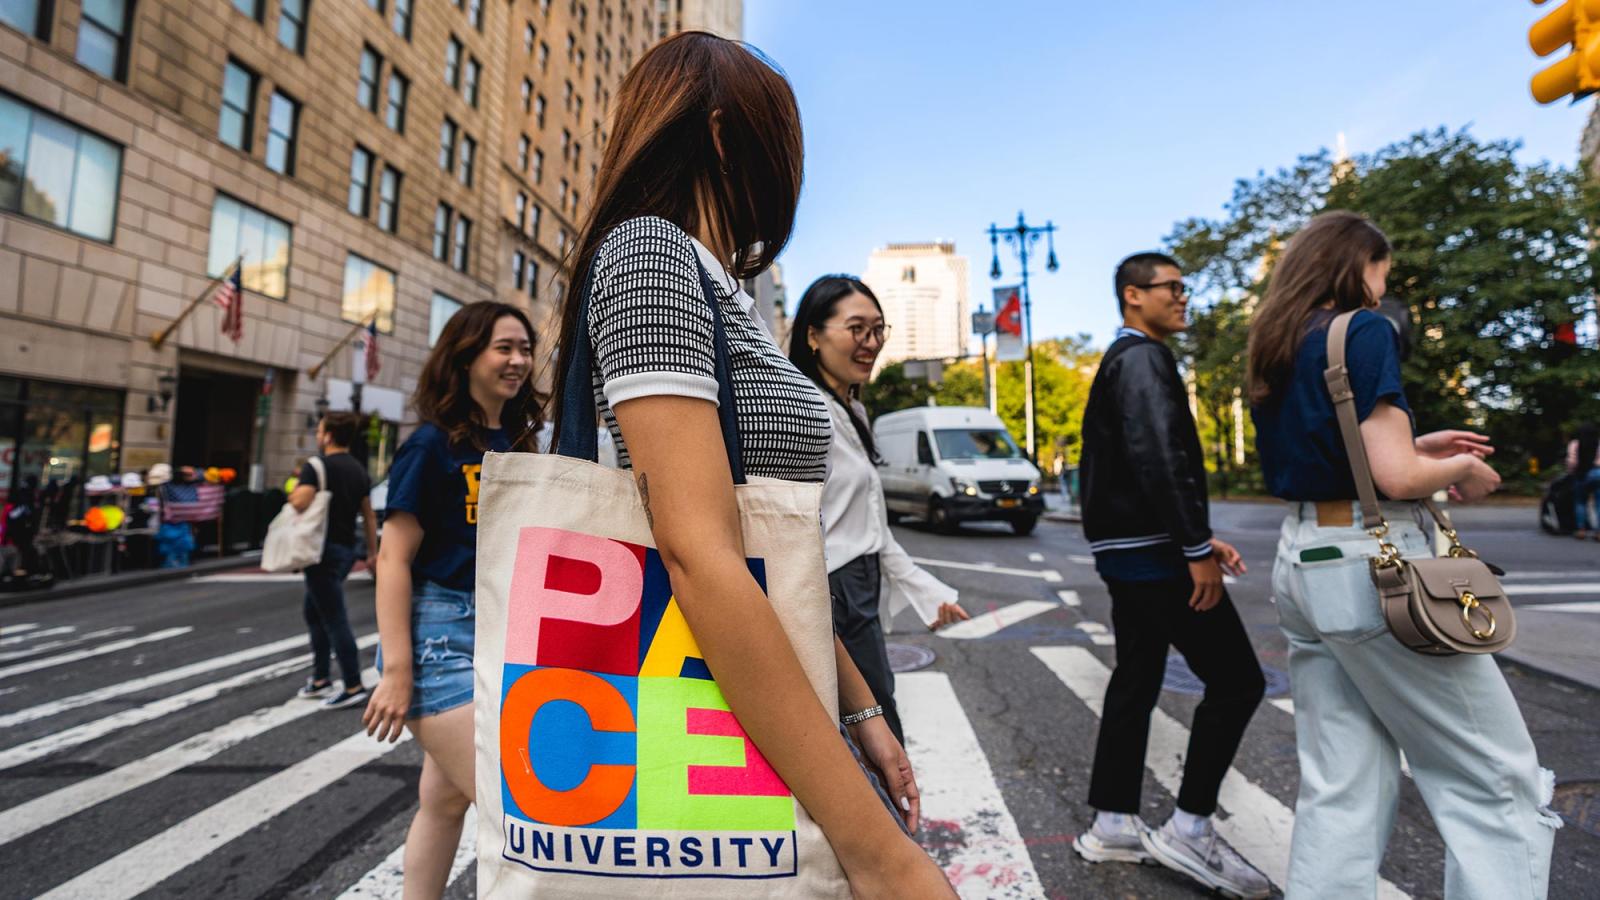 Pace students walking on Lower Manhattan street, with a Pace tote bag the primary focus of the photo